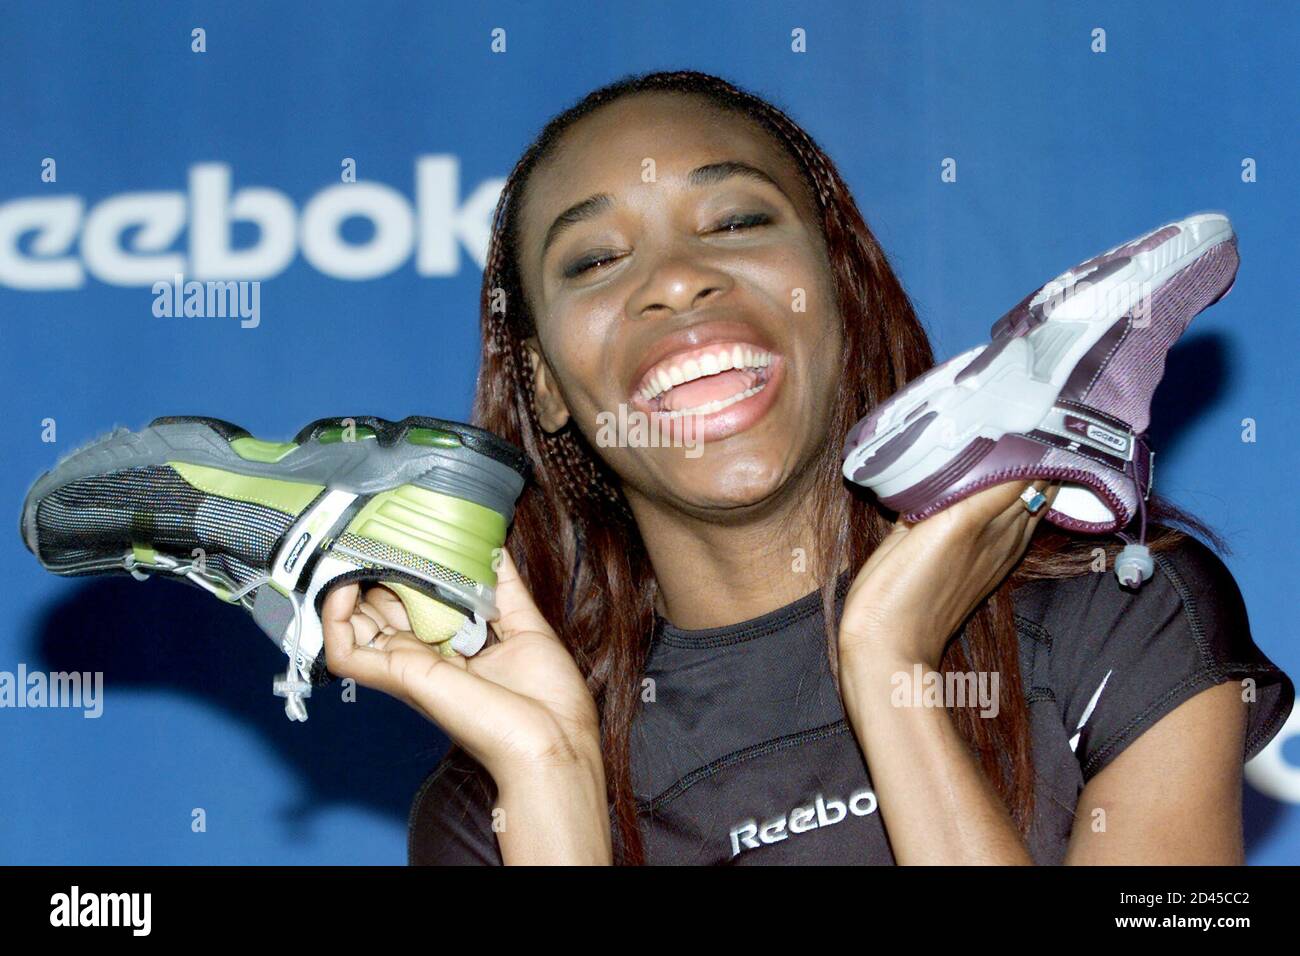 Tennis star Venus Williams holds up her signature Venus Williams Reebok  tennis shoes at a news conference in New York, December 21, 2000, after  signing a multi-million dollar endorsement contract with Reebok